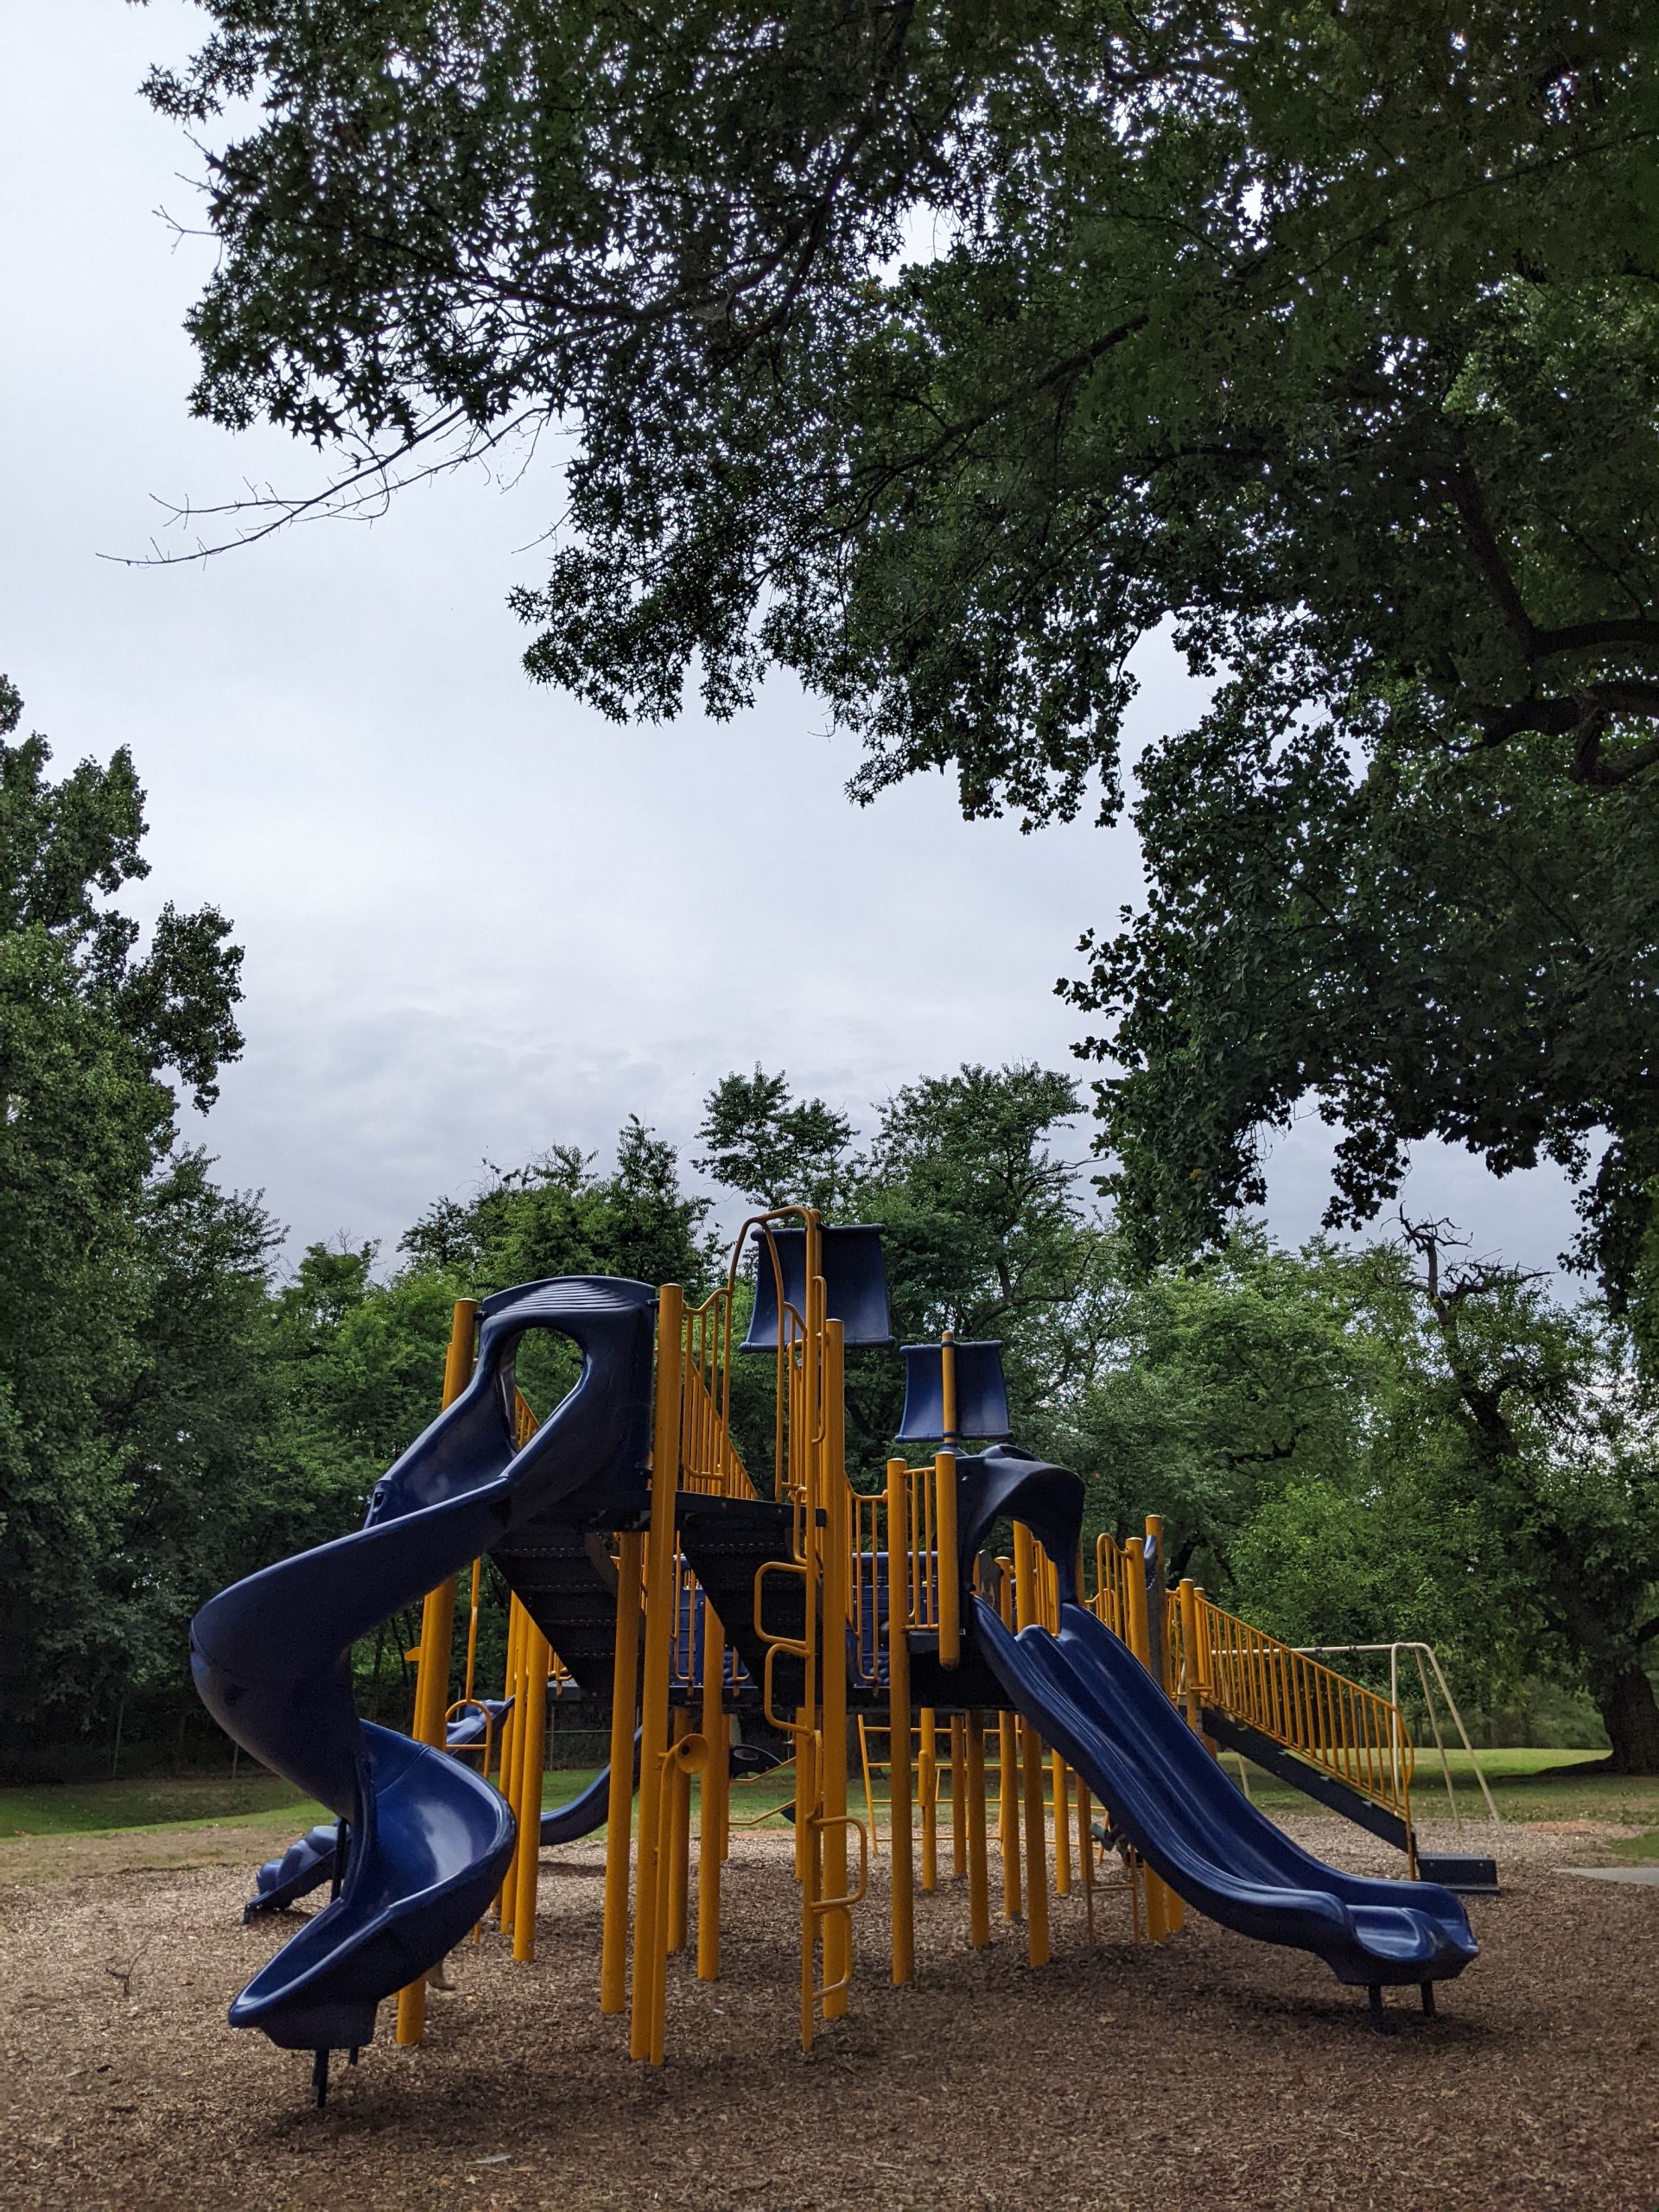 TALL - Large playground At Red Bank Battlefield Park Playground in National Park NJ